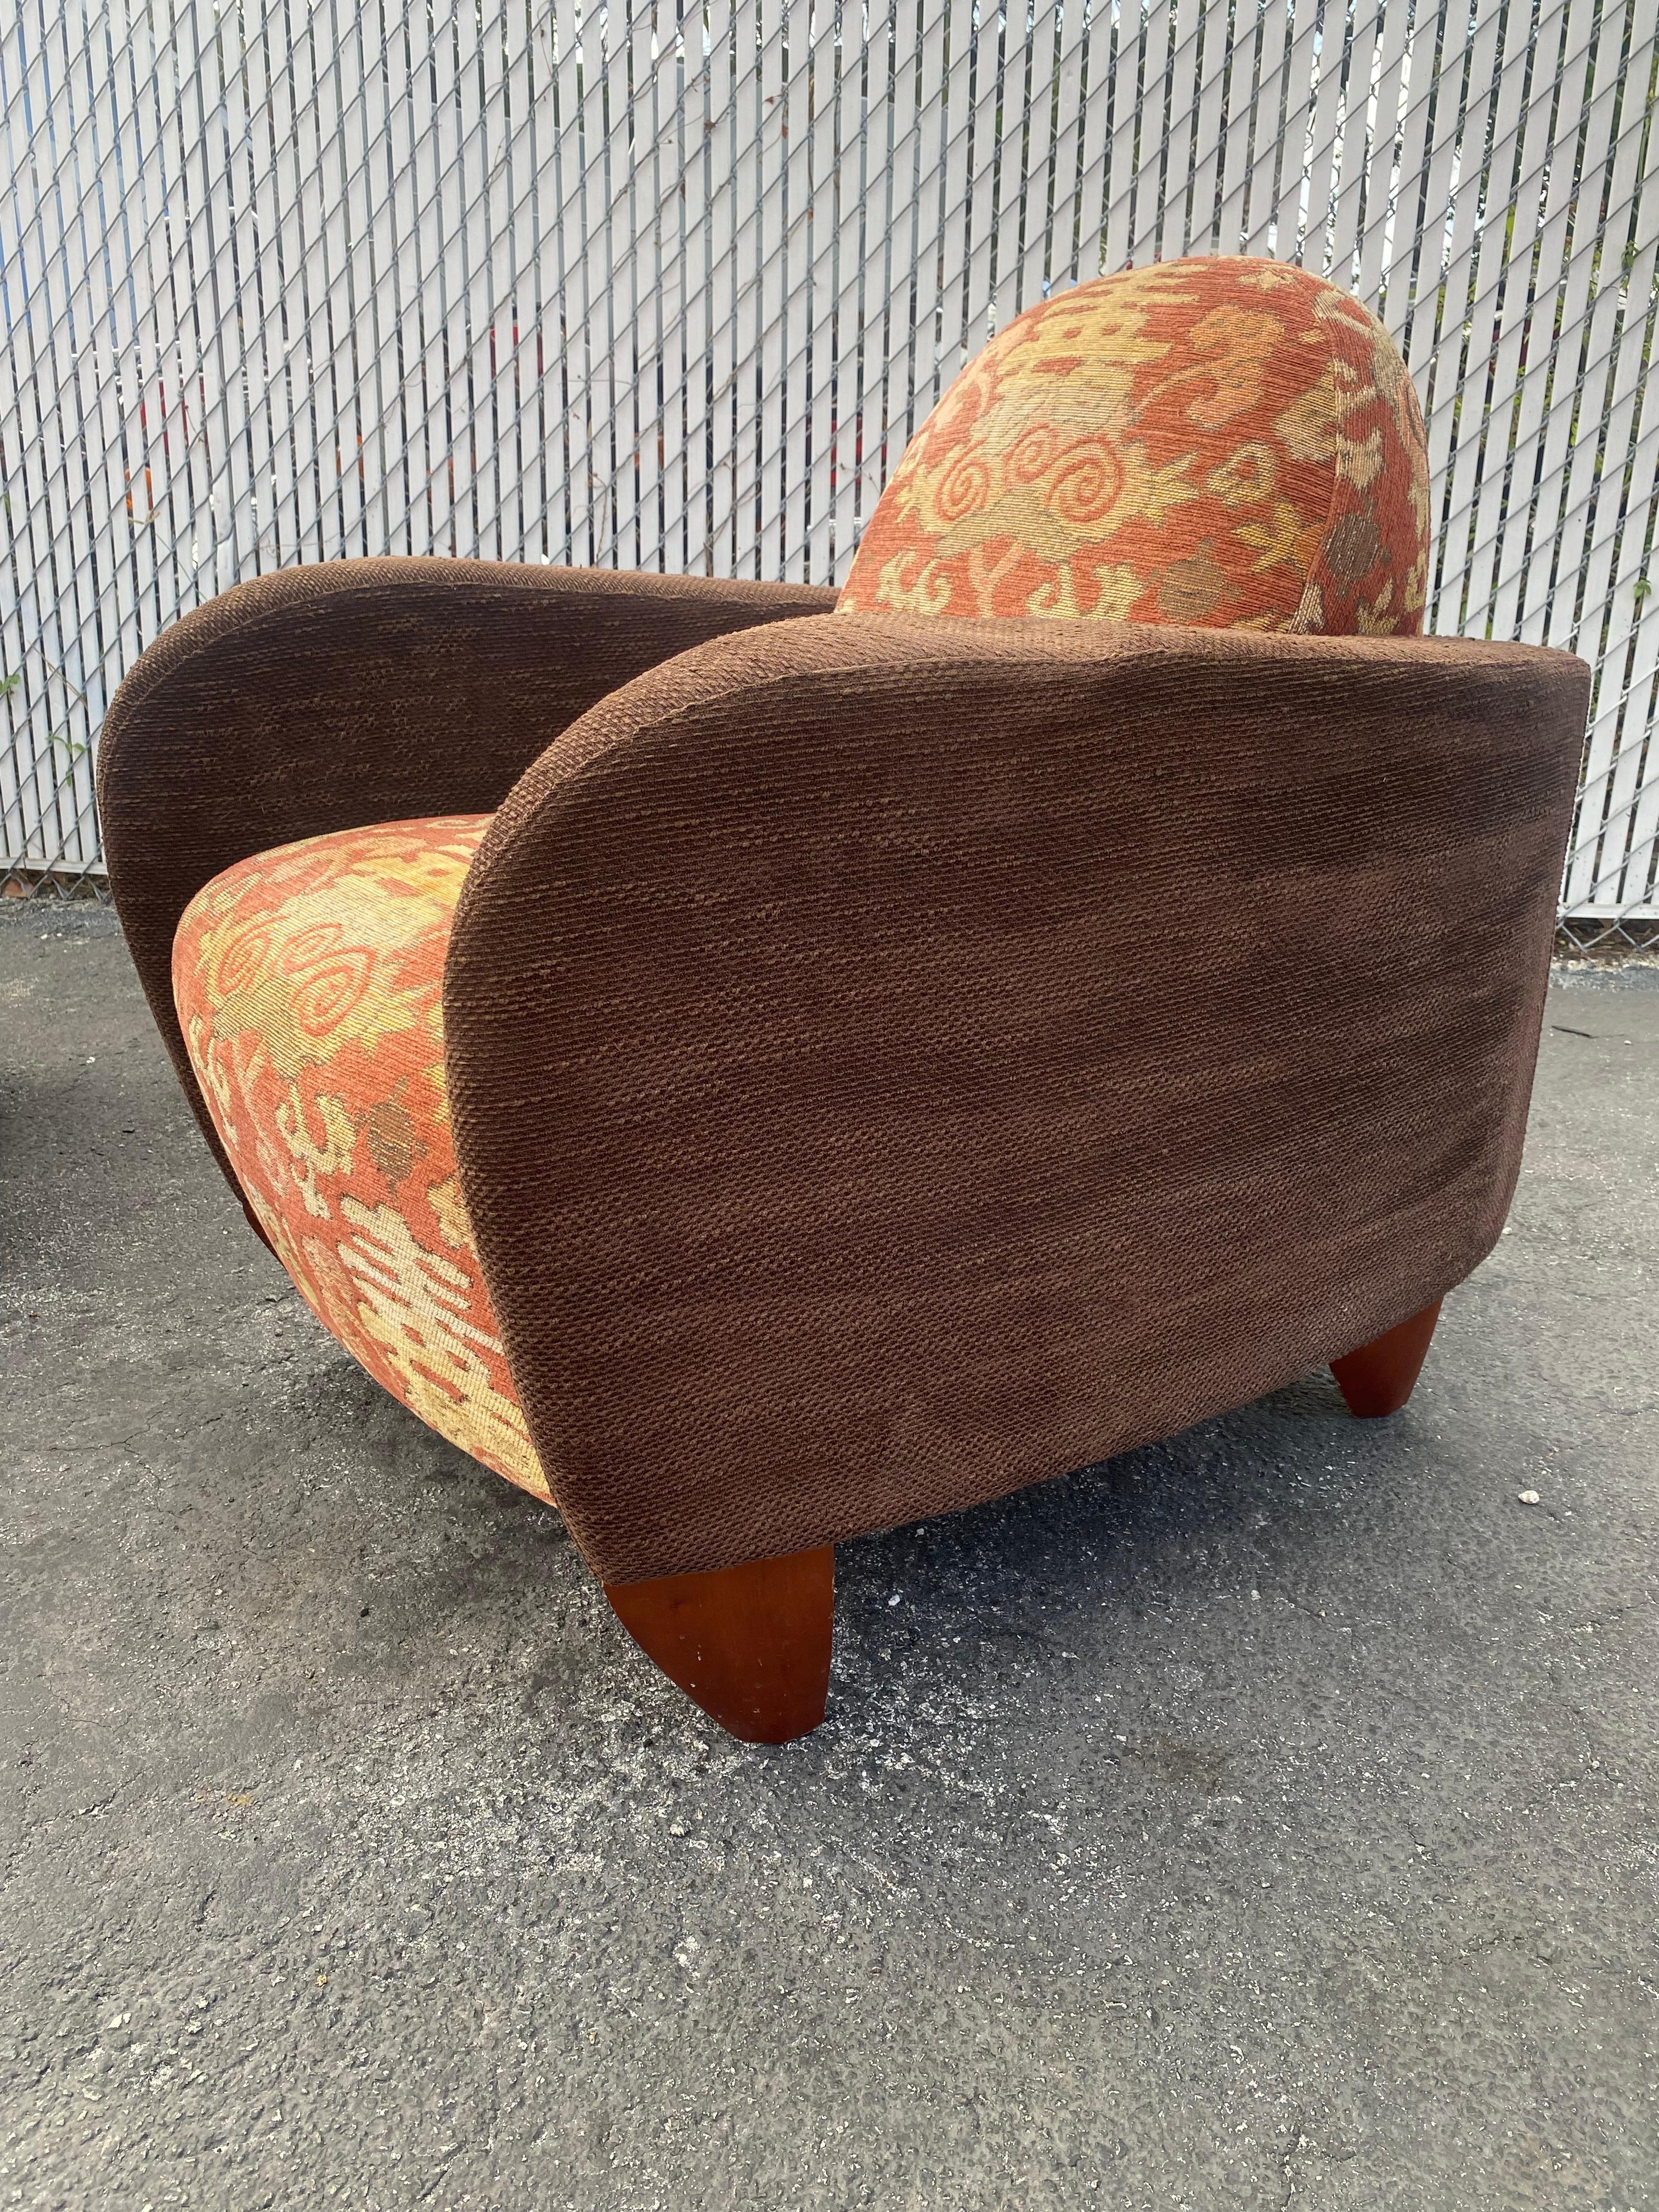 1970s Sculptural Art Deco Chenille Walnut Curved Chairs, Set of 2 For Sale 5